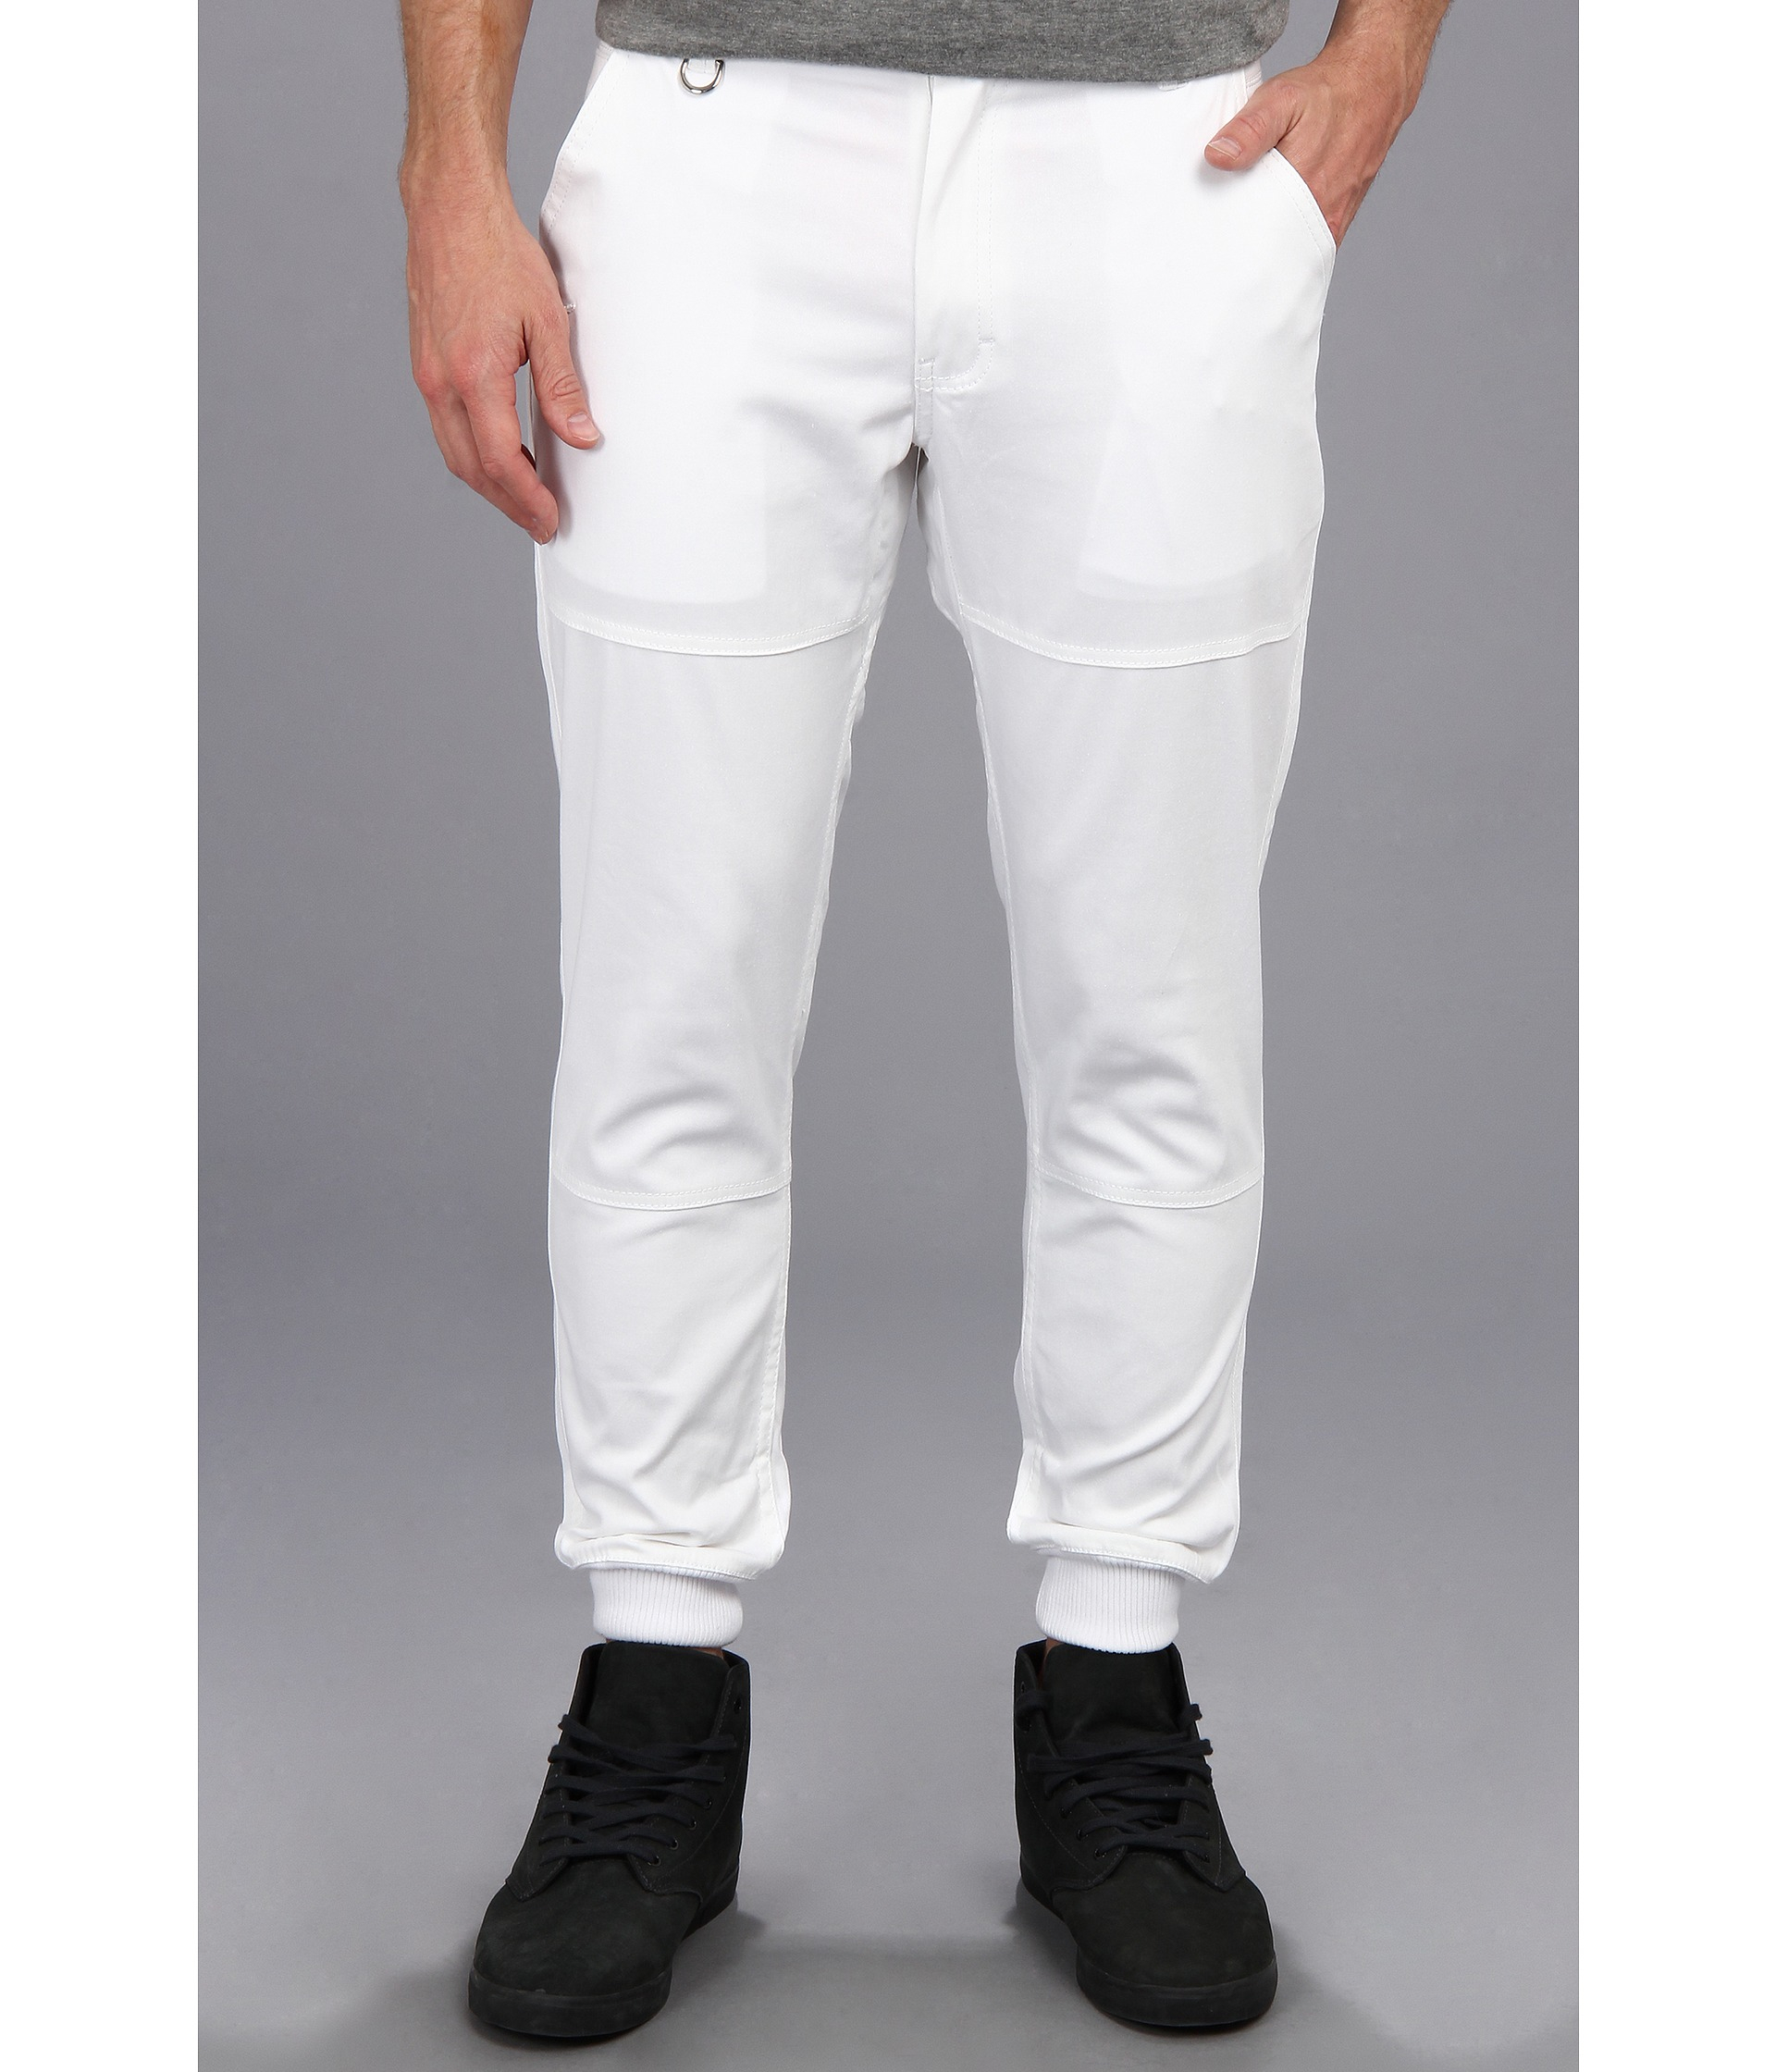 Lyst - Timberland Legacy Jogger Pant in White for Men